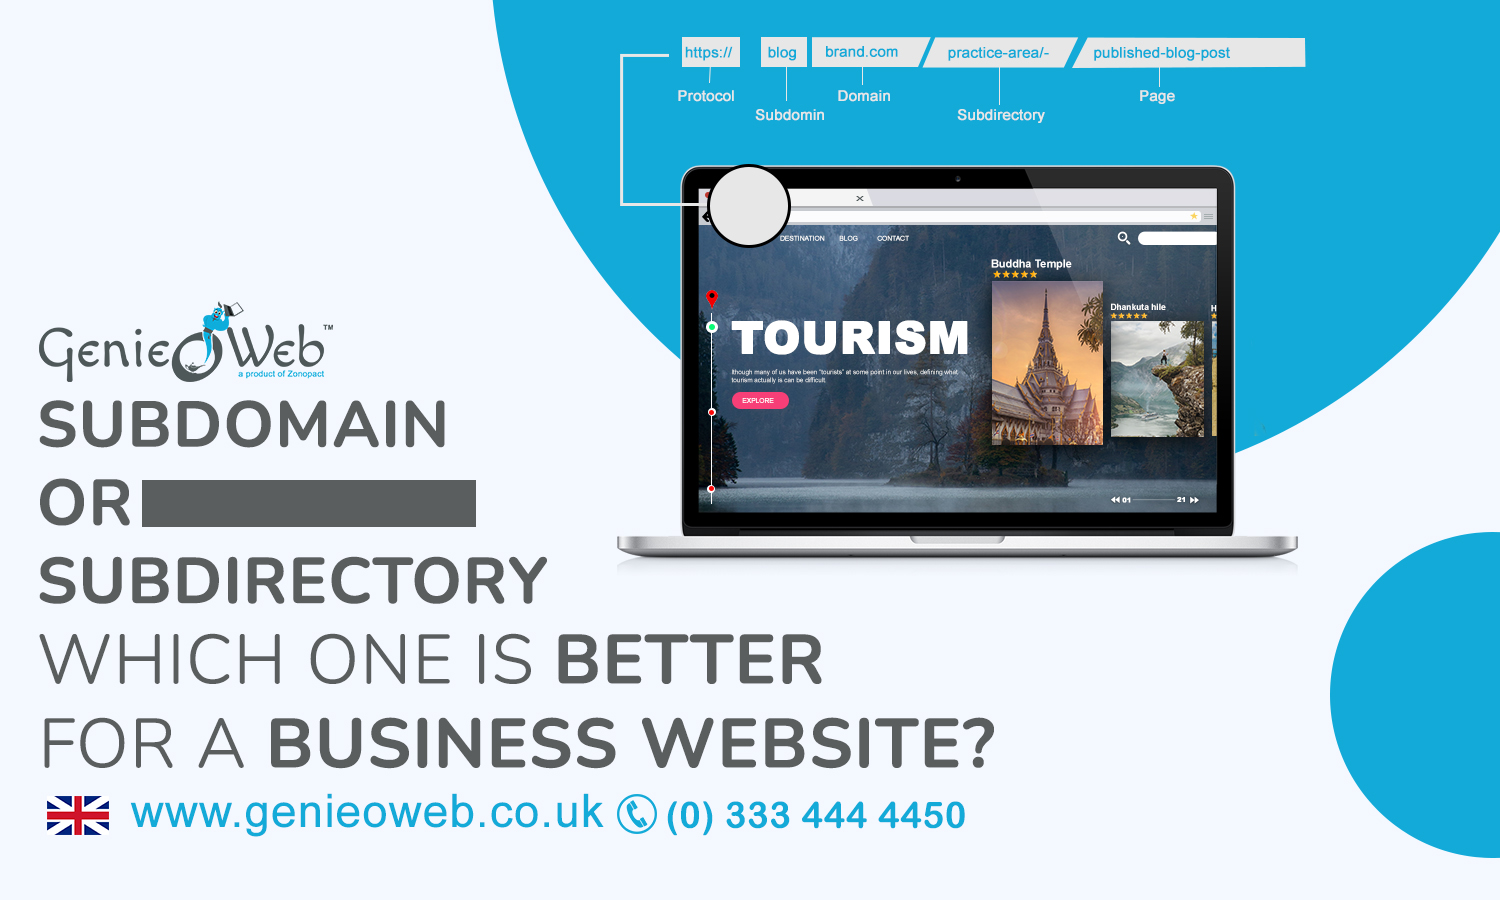 Subdomain or Subdirectory Which One is Better for a Business Website